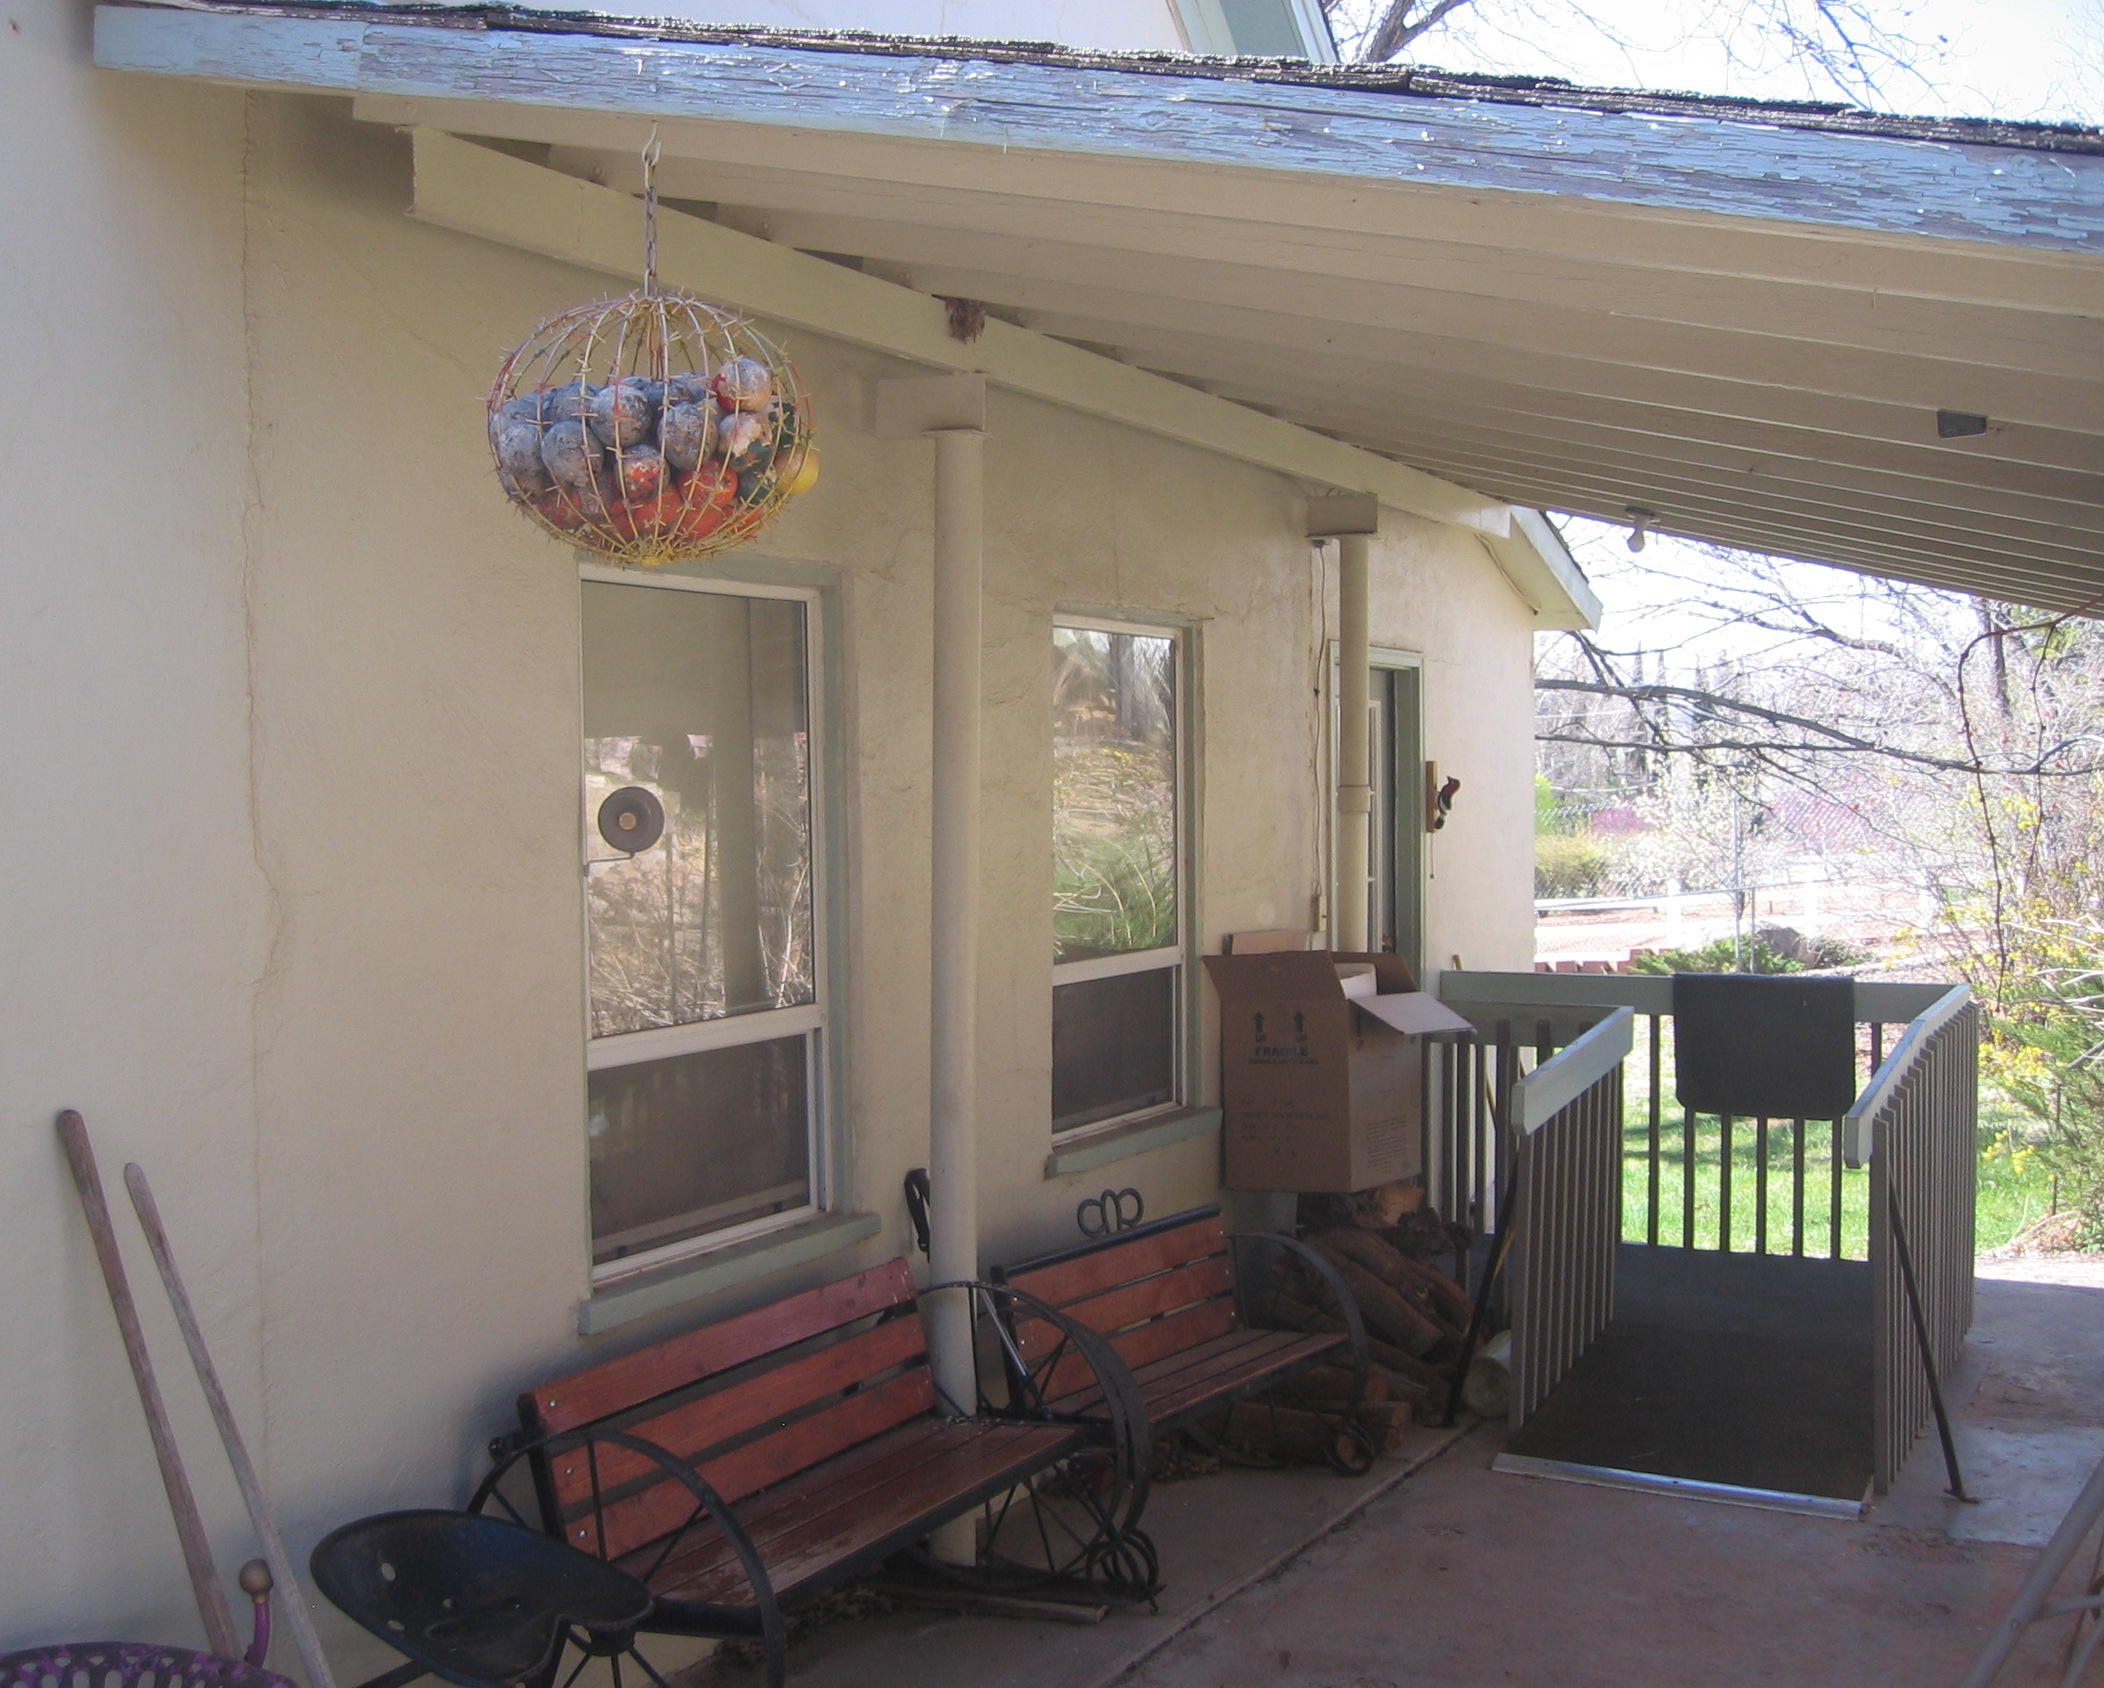 Porch of the Milt Holt home in Gunlock